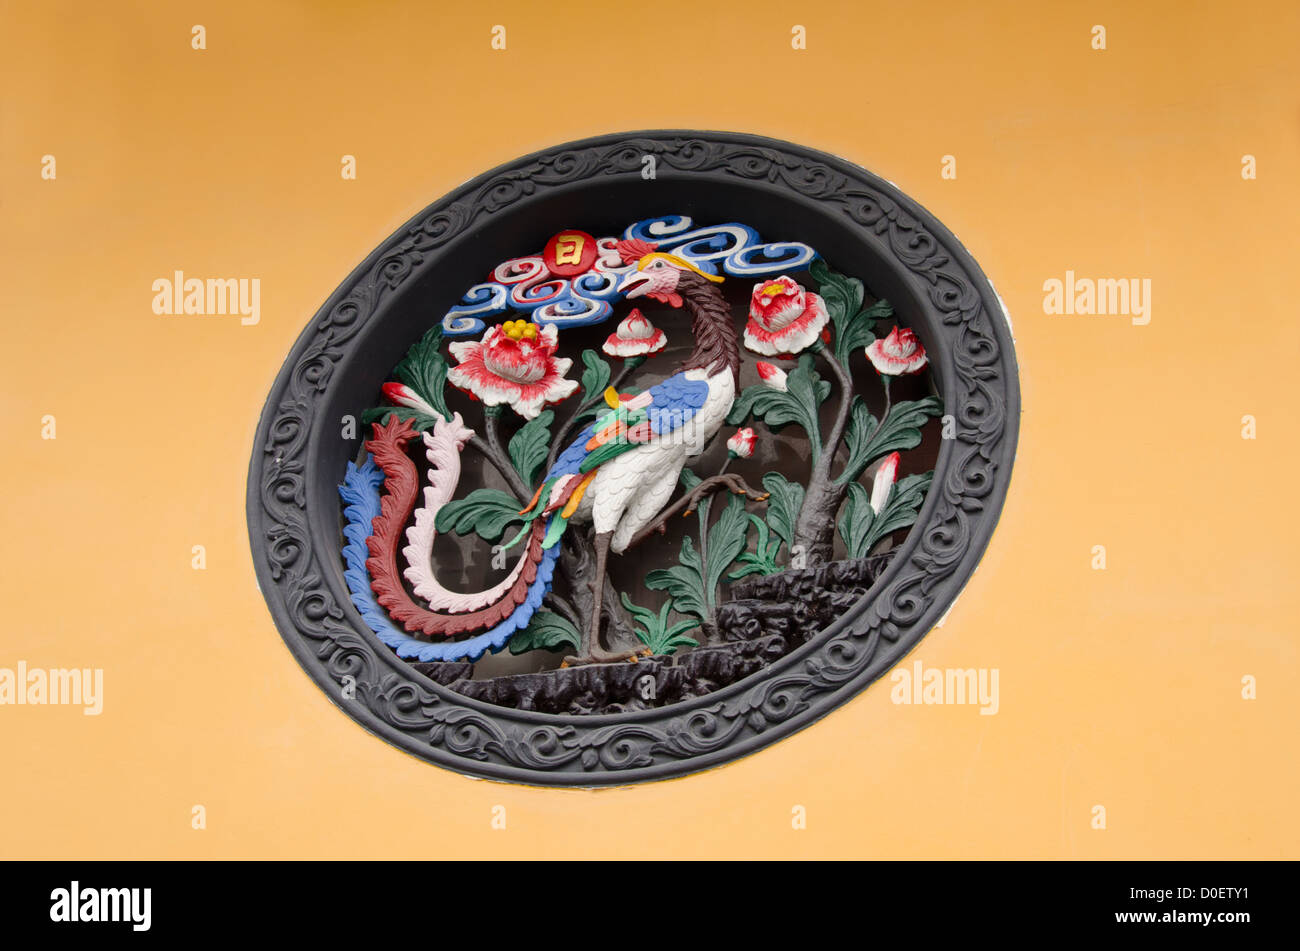 China, Shanghai, Jade Buddha Temple. Wall detail with carved mythical phoenix bird. Stock Photo